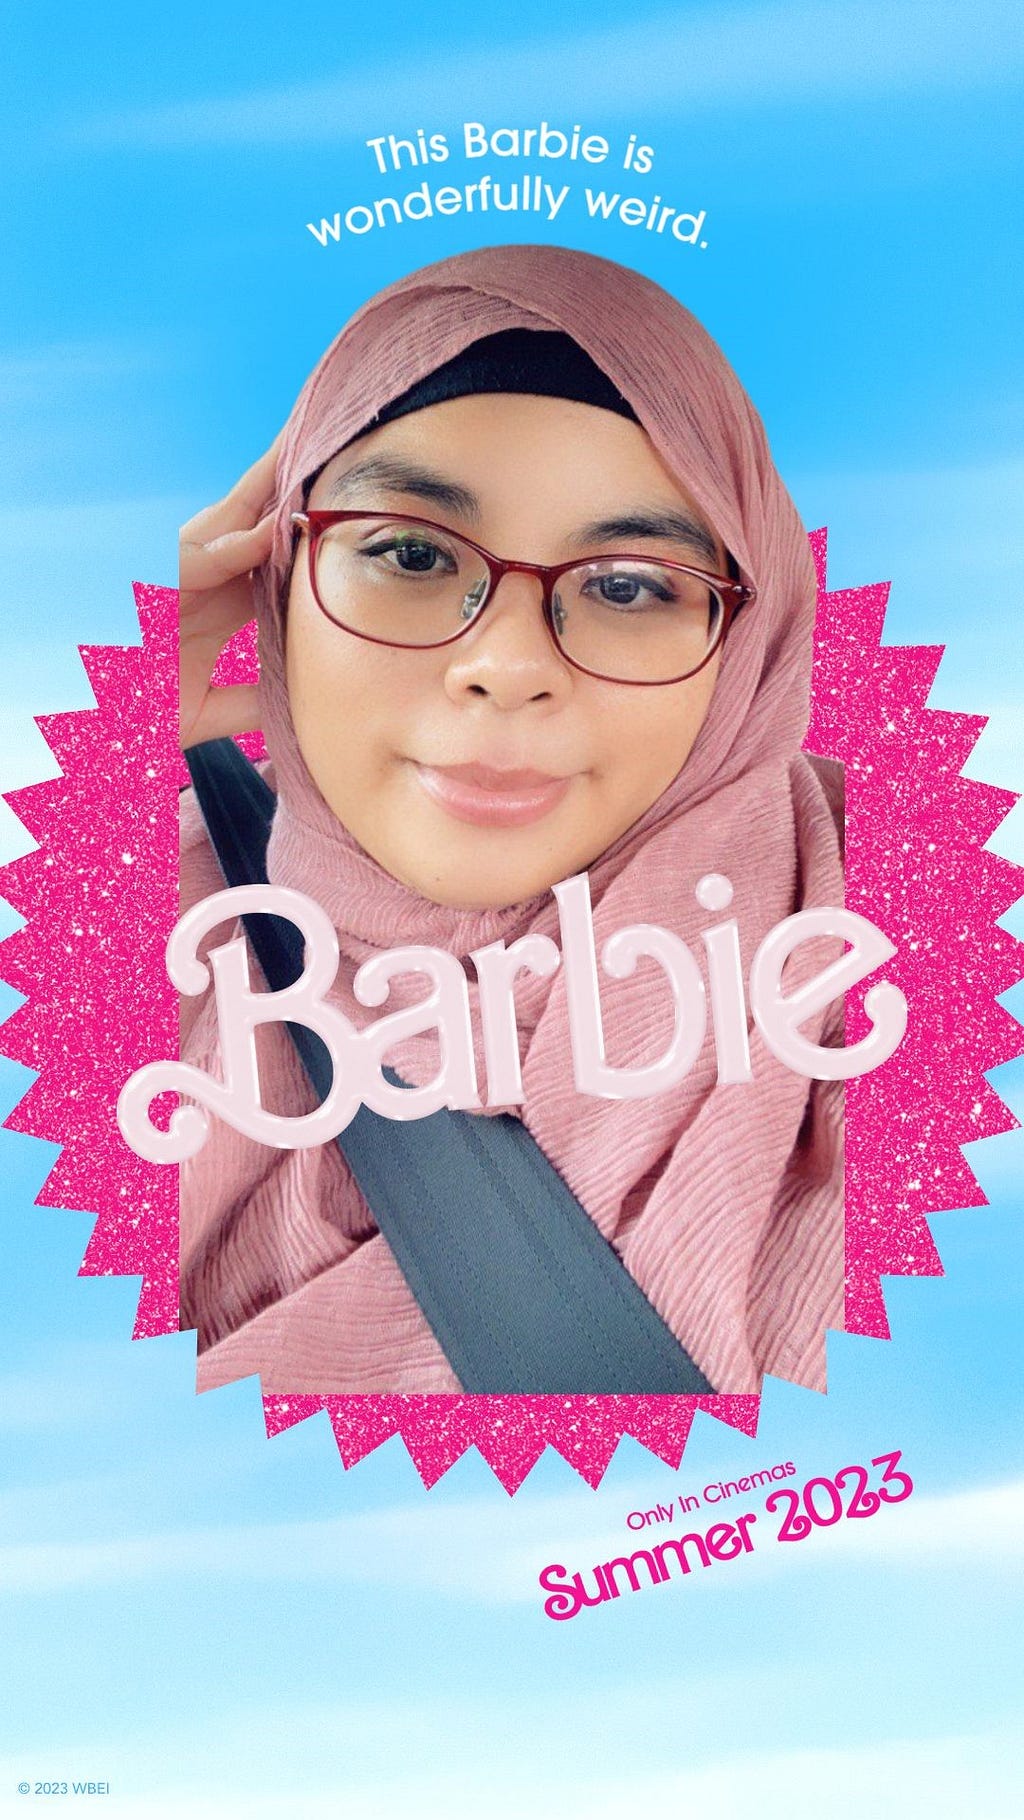 Trying out the Barbie movie sticker